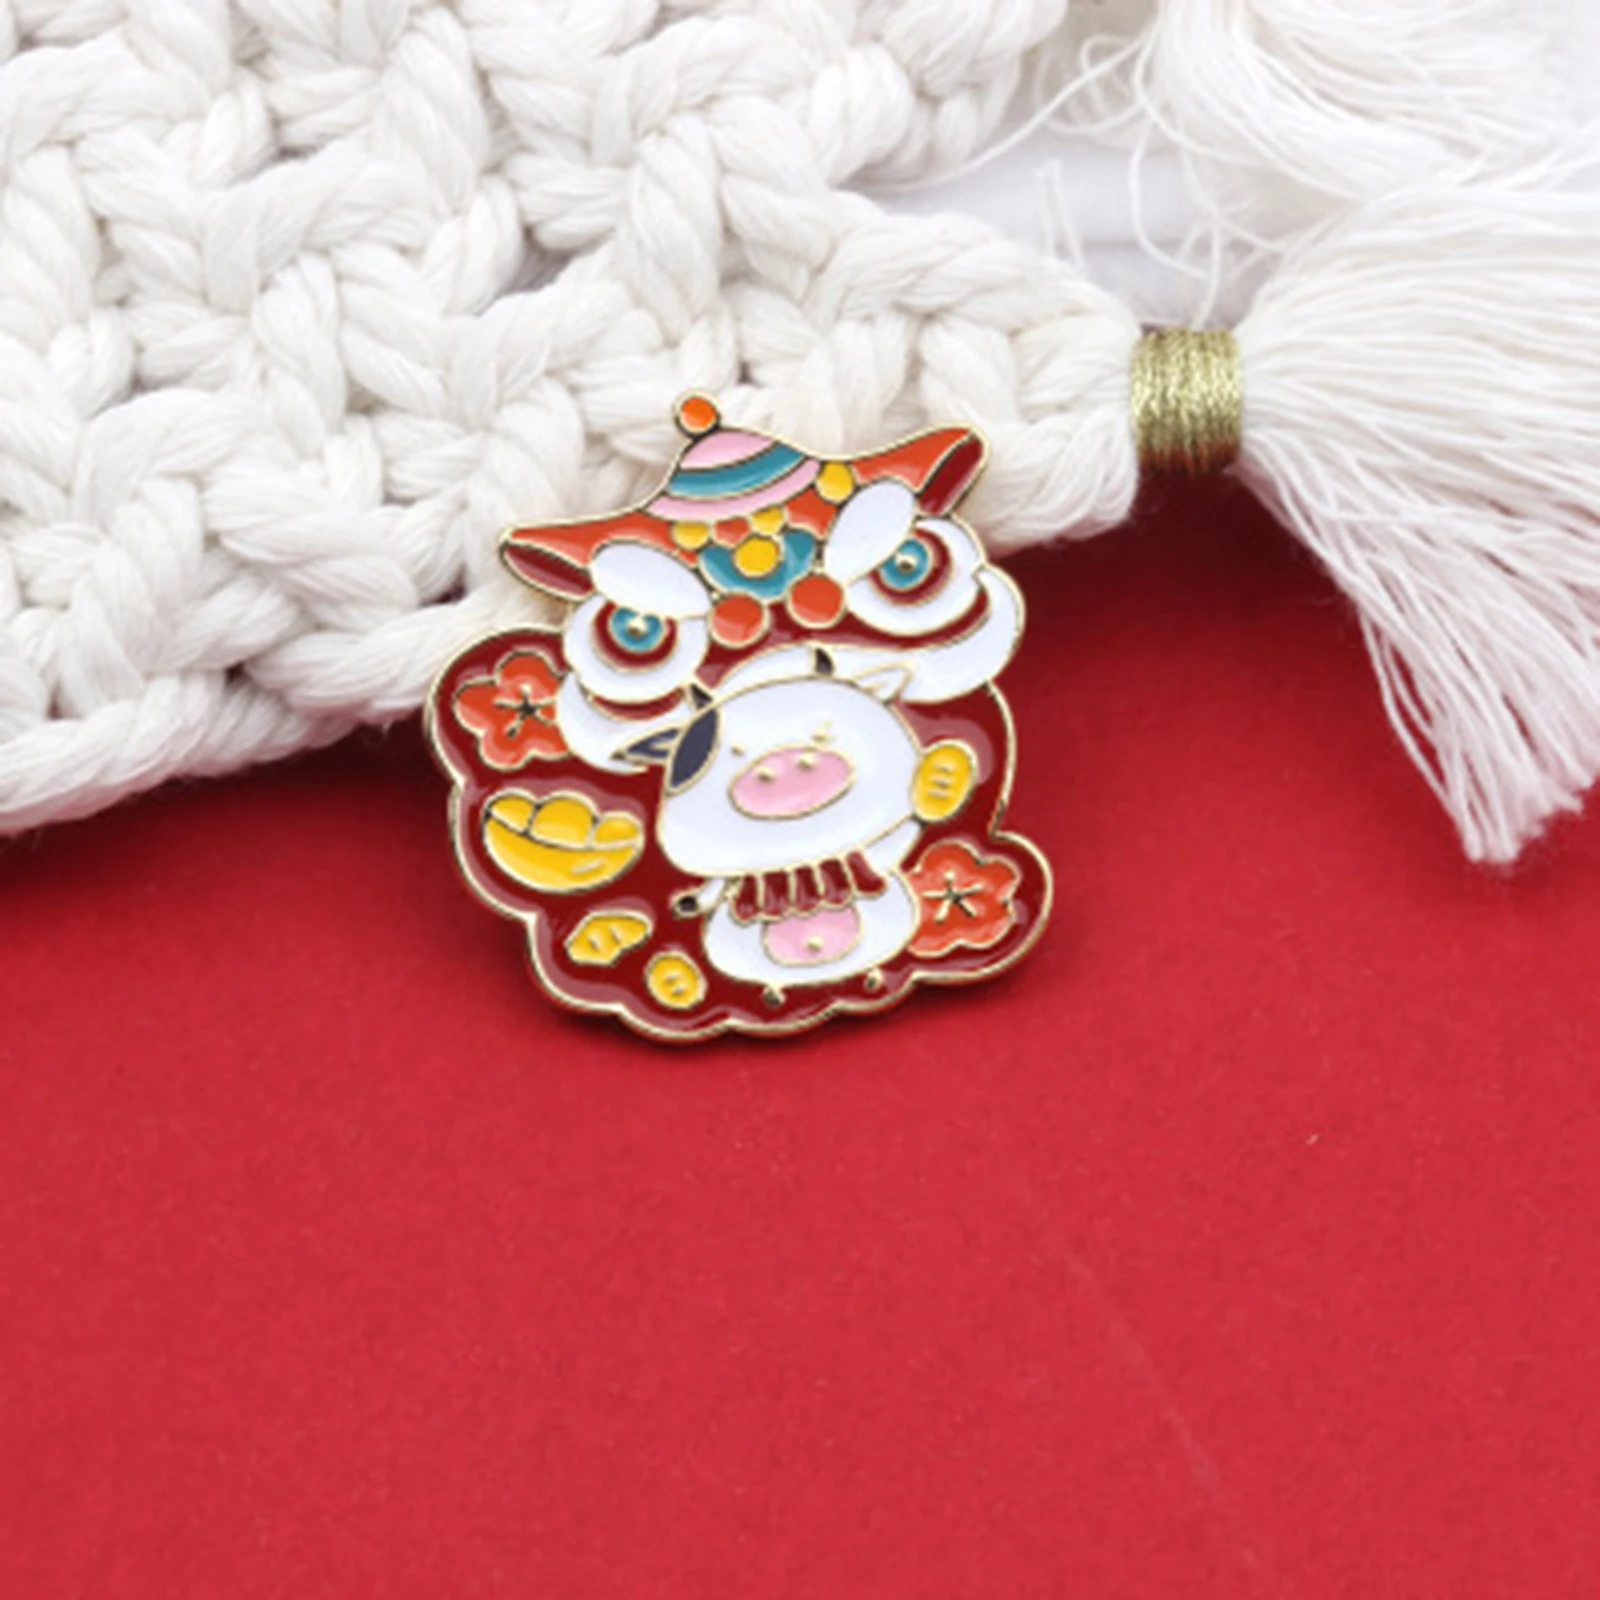 

1Piece 3cmx2.5cm Pin Brooches Cow Animal Enamel The Year Of The Ox Brooch New Style Cuteand Fashion Zinc Alloy Brooches